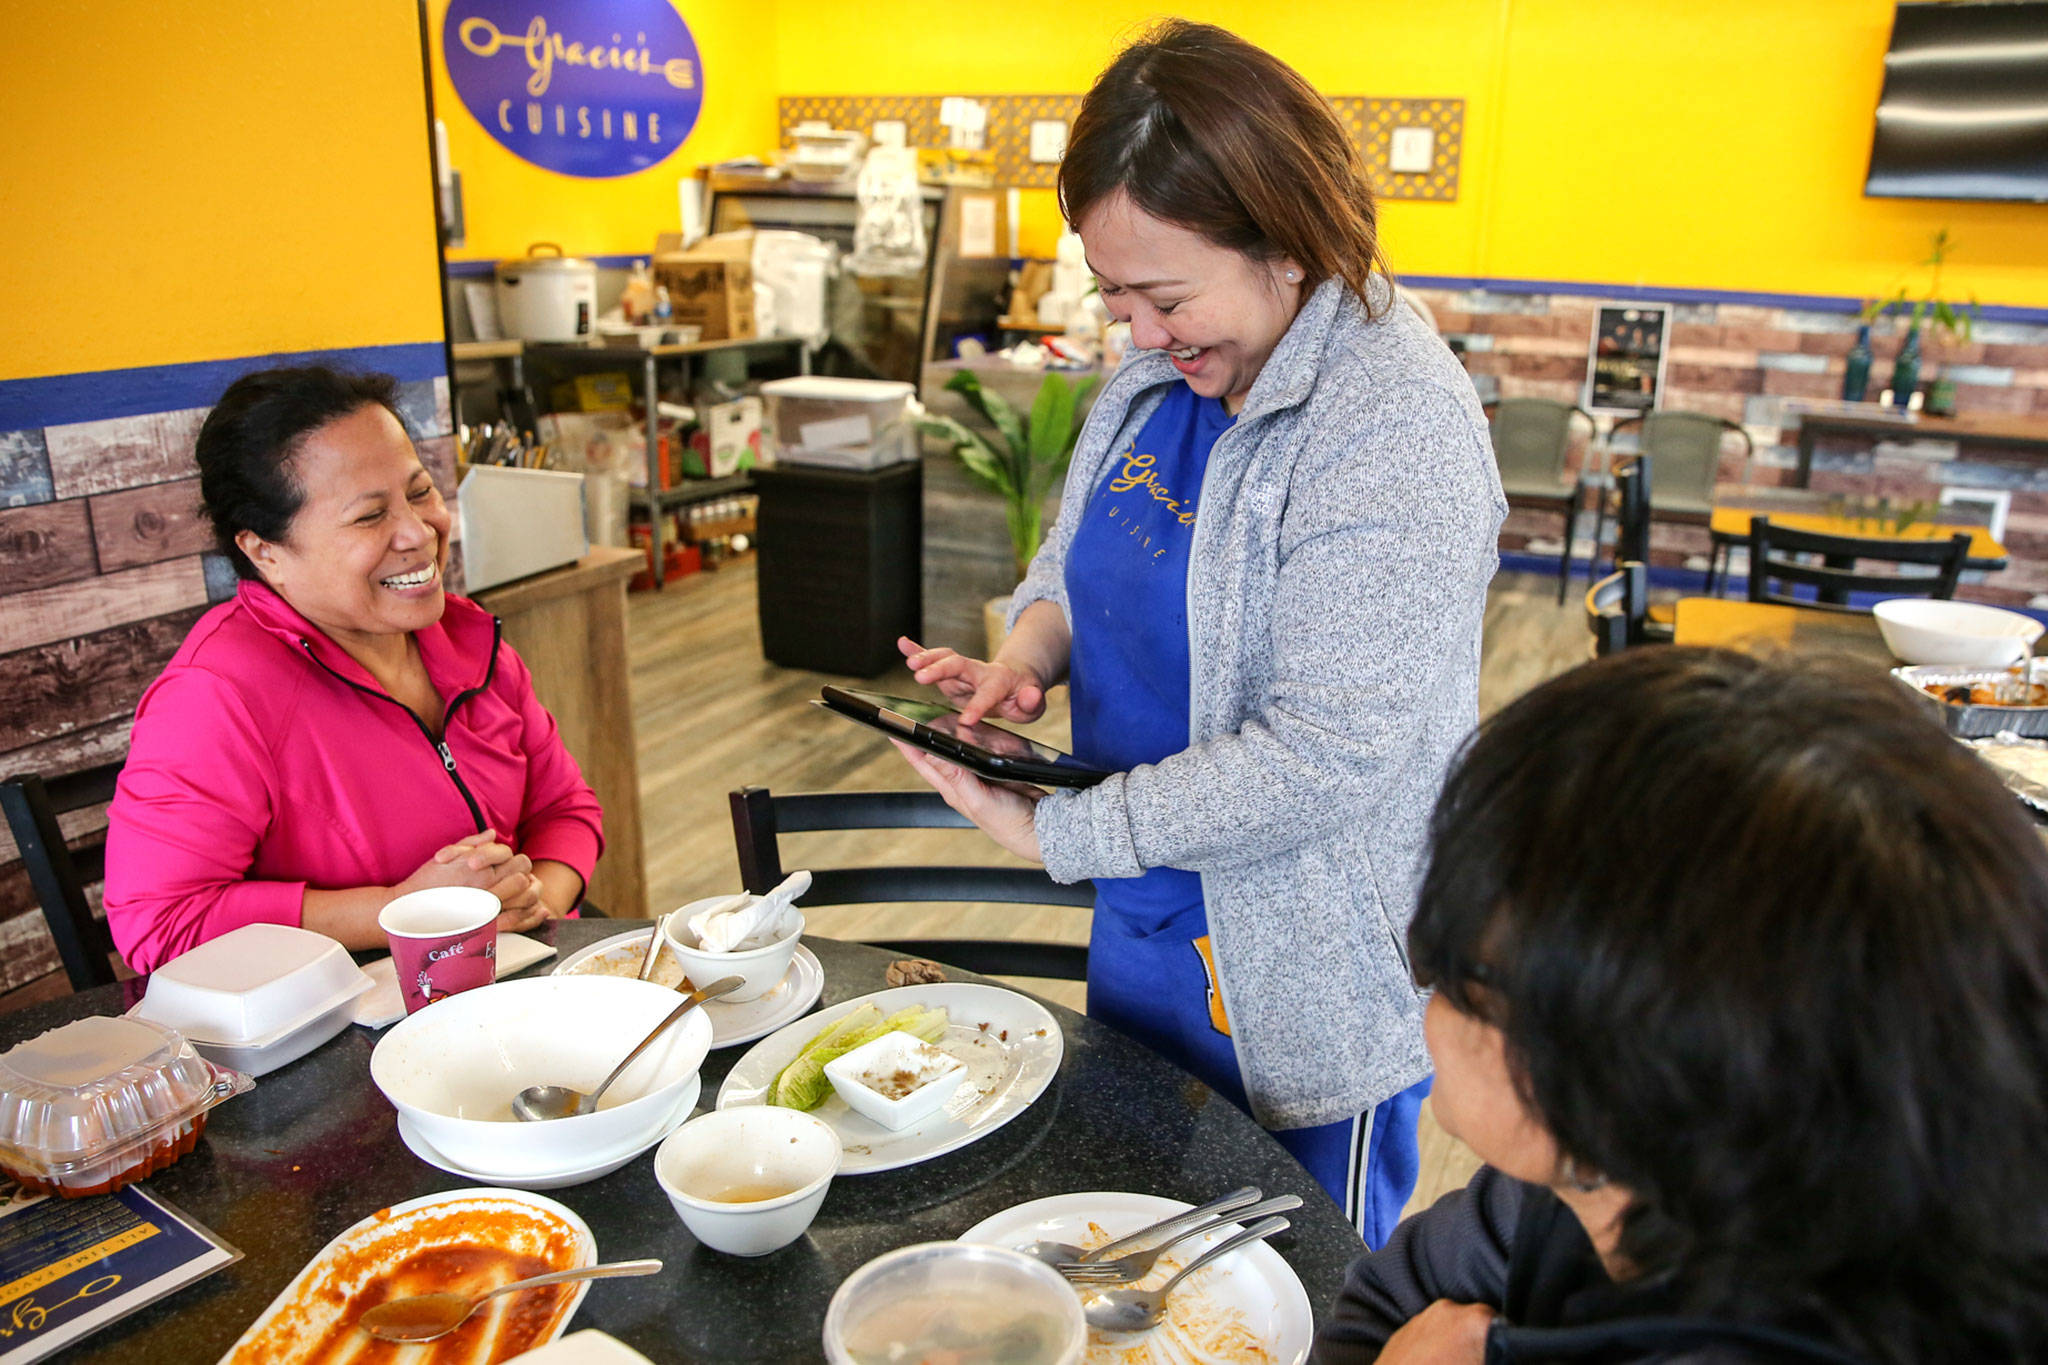 Grace Correa (center) owner-operator, totals a check for Merlyn Gustafson (left) and Jojie Villaroya at Gracie’s Cuisine Saturday afternoon in Everett on March 14. Two days later, sit-down dining was banned in restaurants across the state. (Kevin Clark / The Herald)